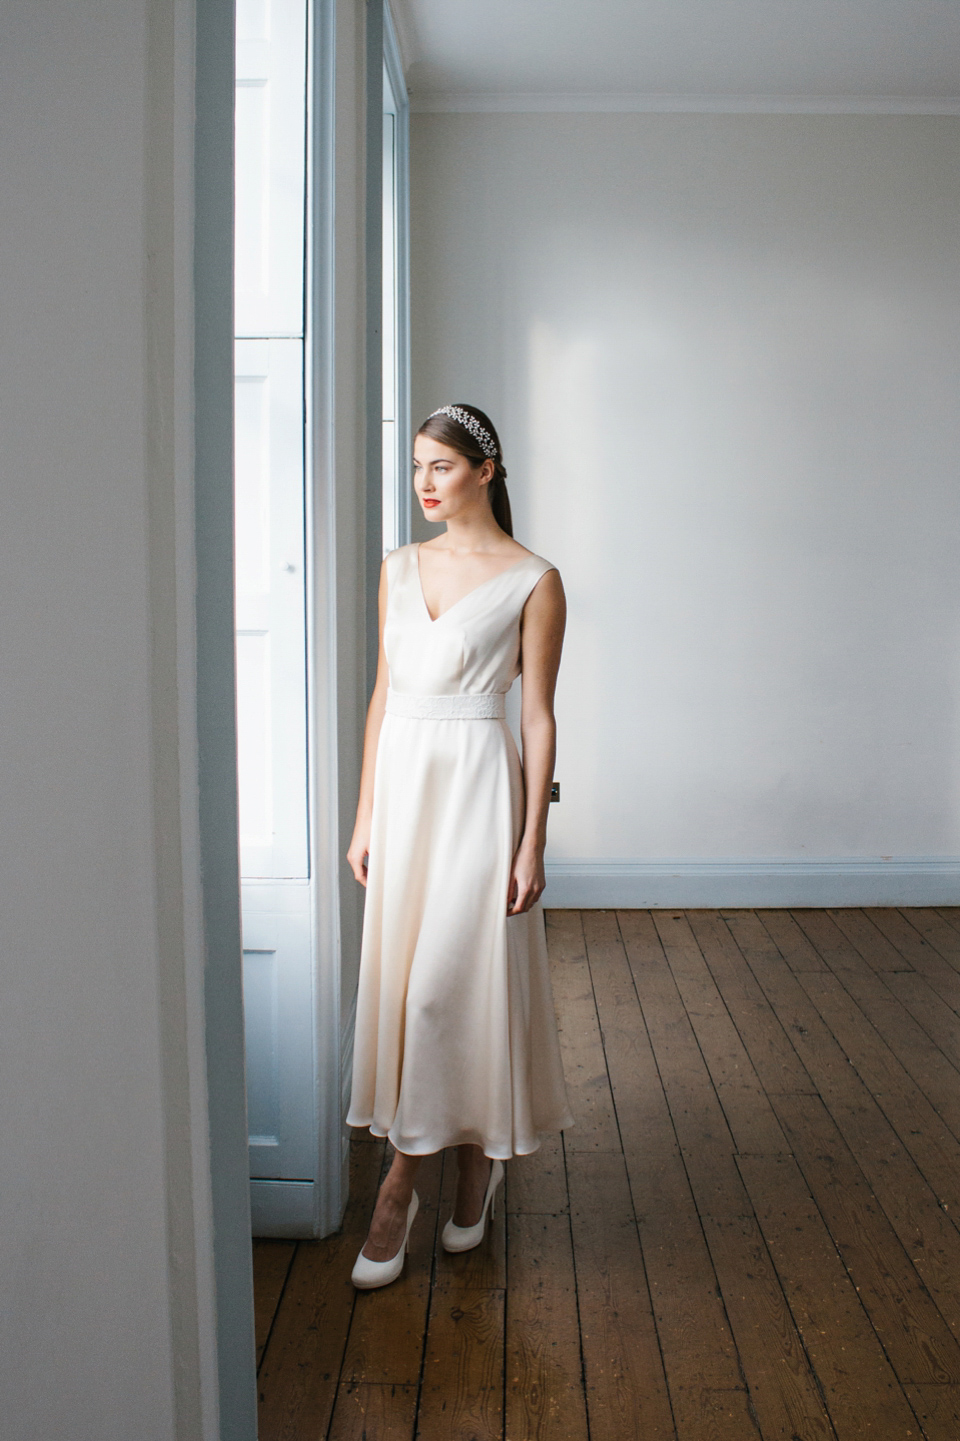 Introducing The New Bridal Capsule Collection From Andrea Hawkes